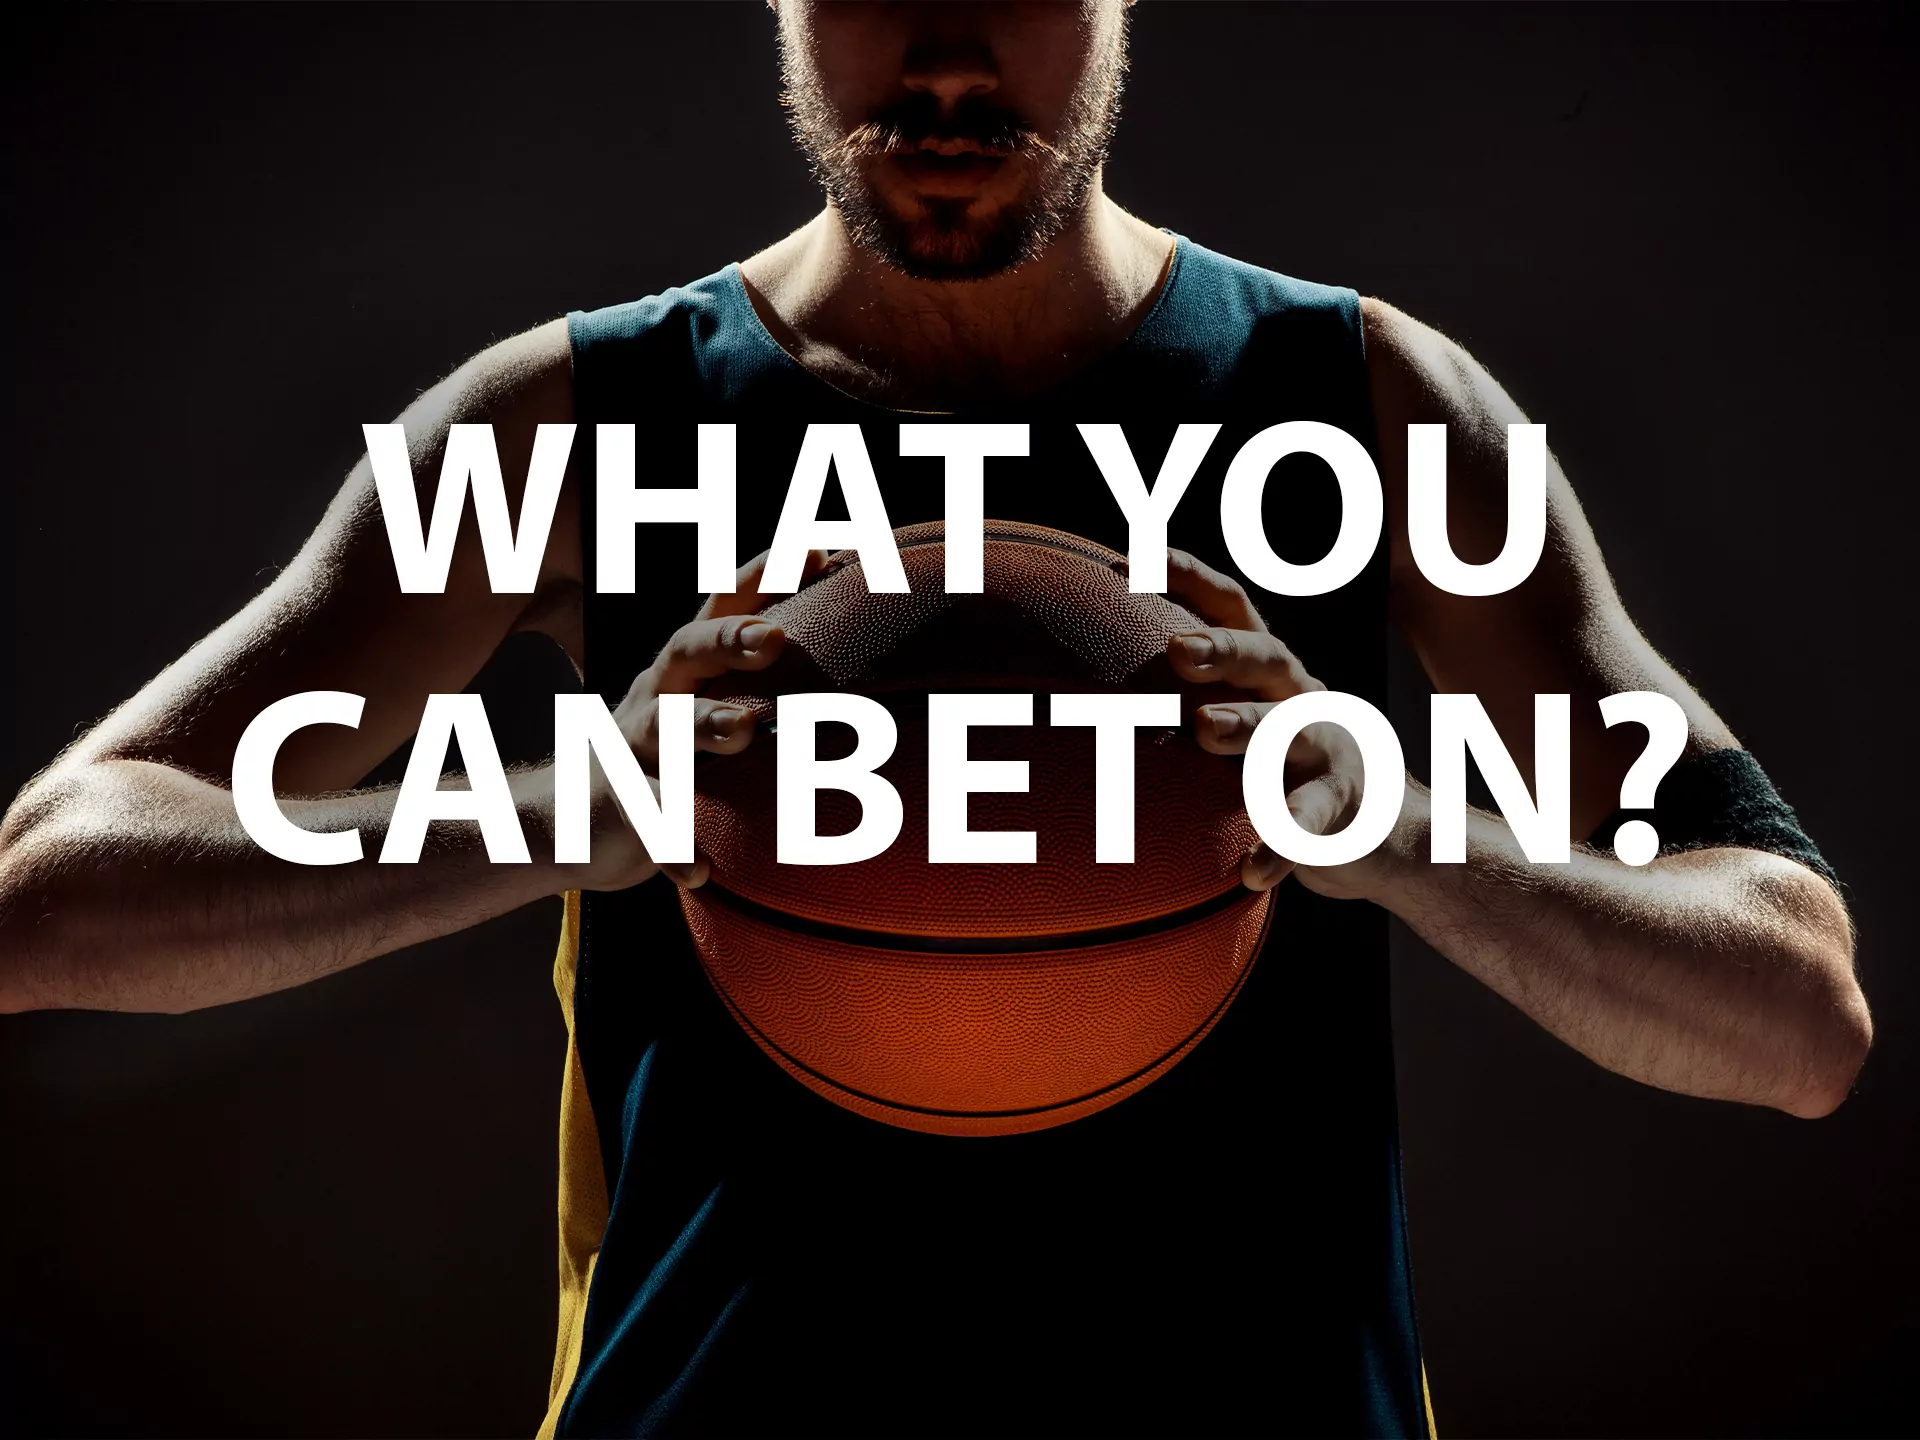 You can bet on the ost populat basketball leagues.